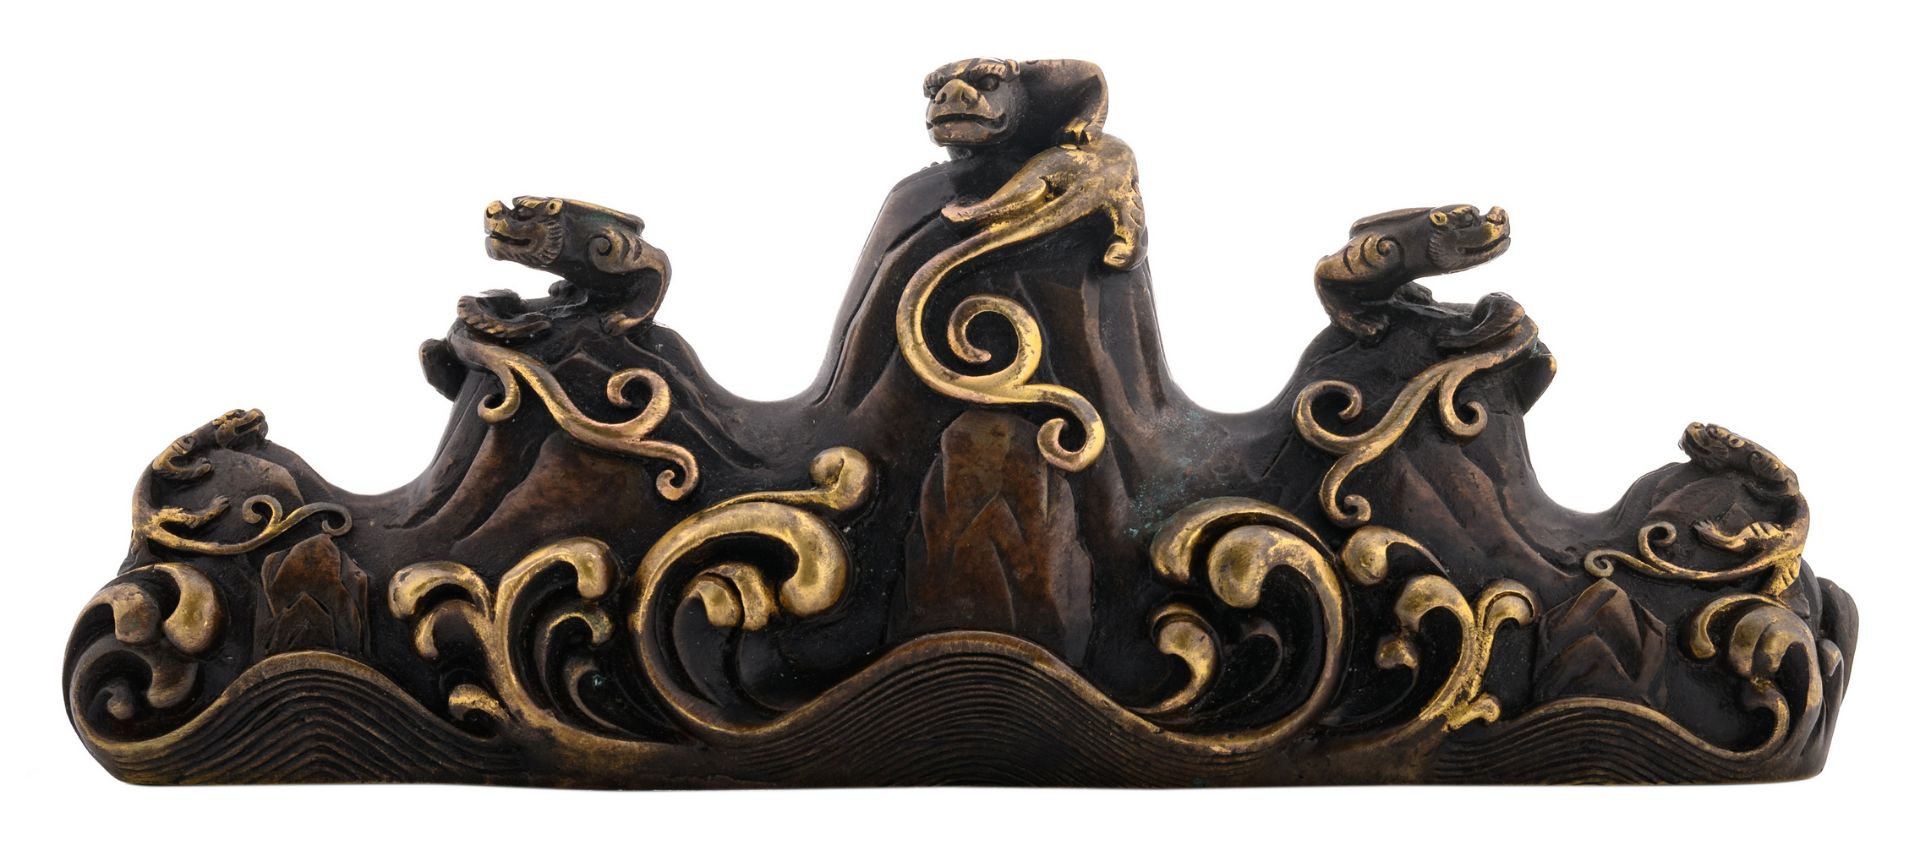 A Chinese patinated bronze scholar's brush rest depicting chilong climbing rocks situated in